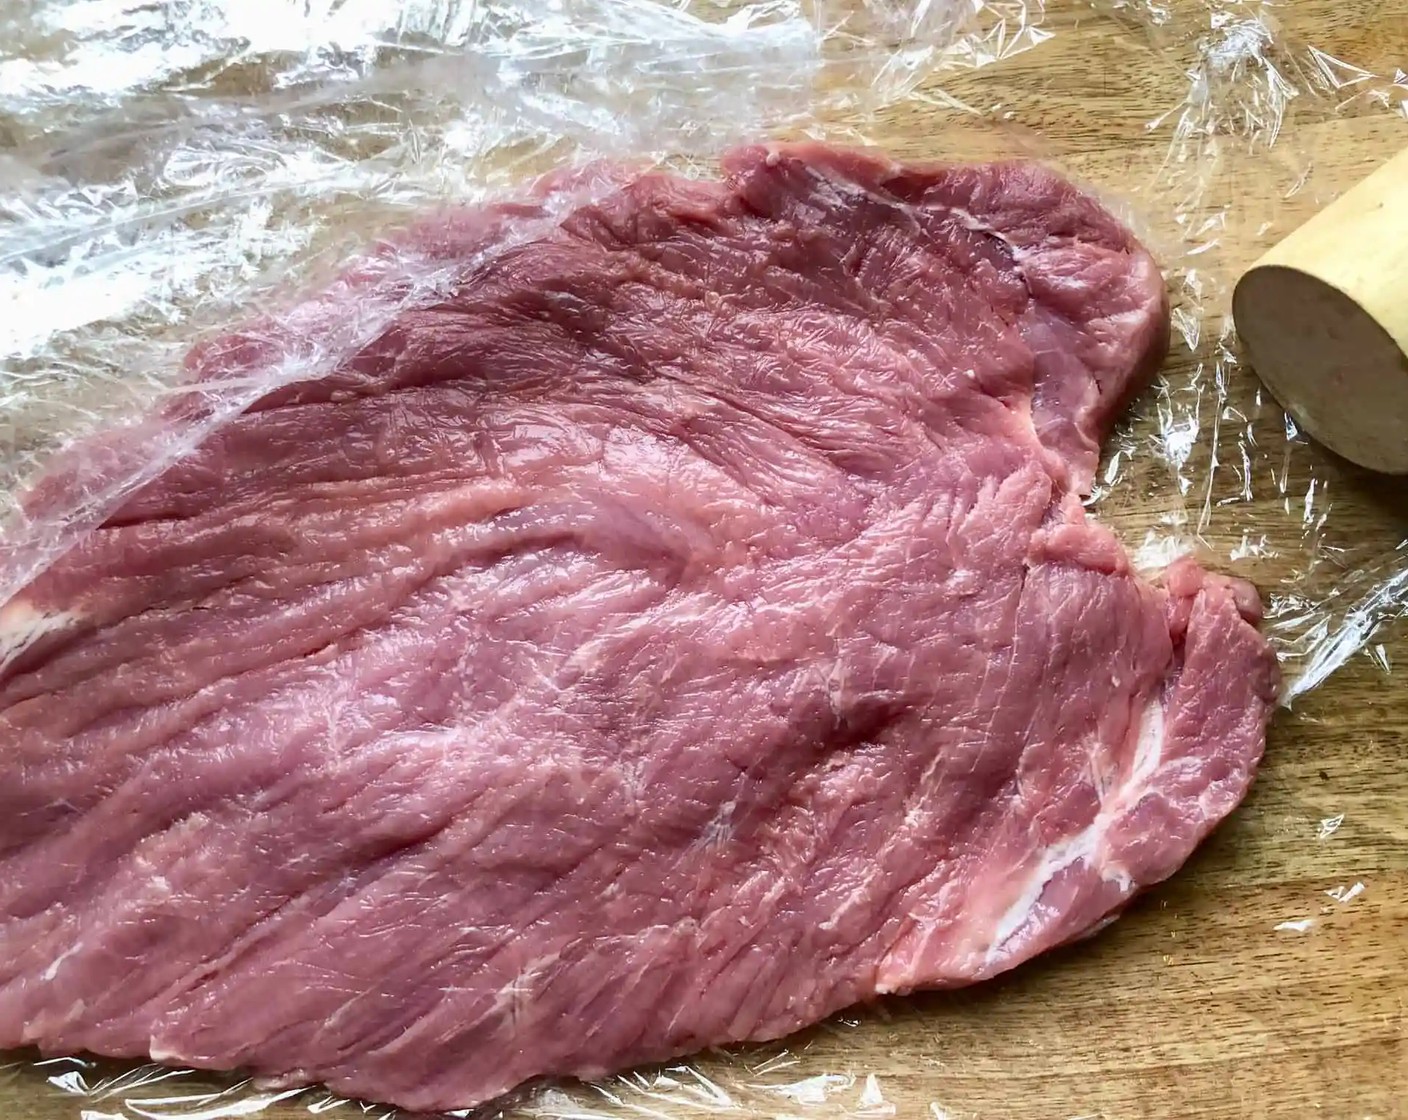 step 3 Pound the Pork Tenderloin: Place the opened piece of meat between two pieces of plastic wrap. Using the flat end of a meat mallet, pound the tenderloin until it is about 1/2-inch thick uniformly. Keep covered with plastic wrap and set aside.